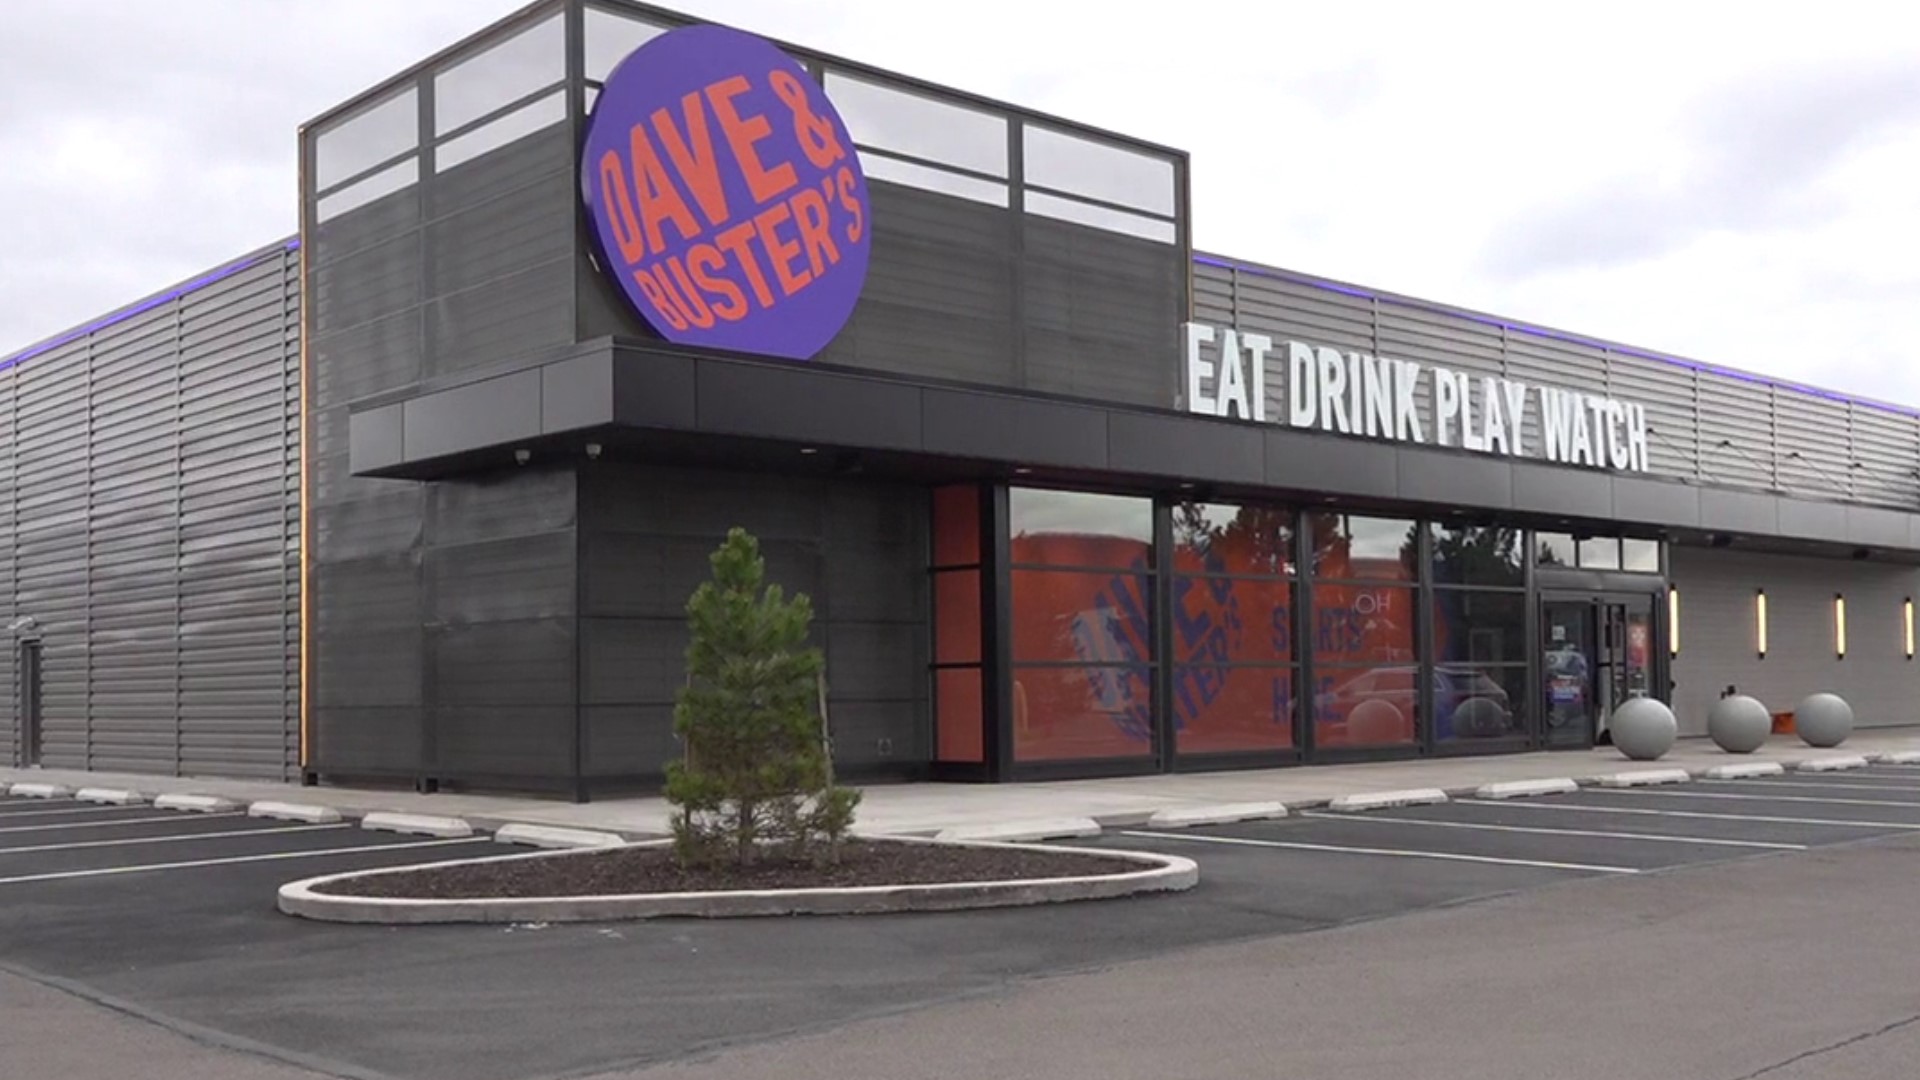 A long-awaited Dave & Buster's is set to open its first Scranton-area location on Monday, April 15.